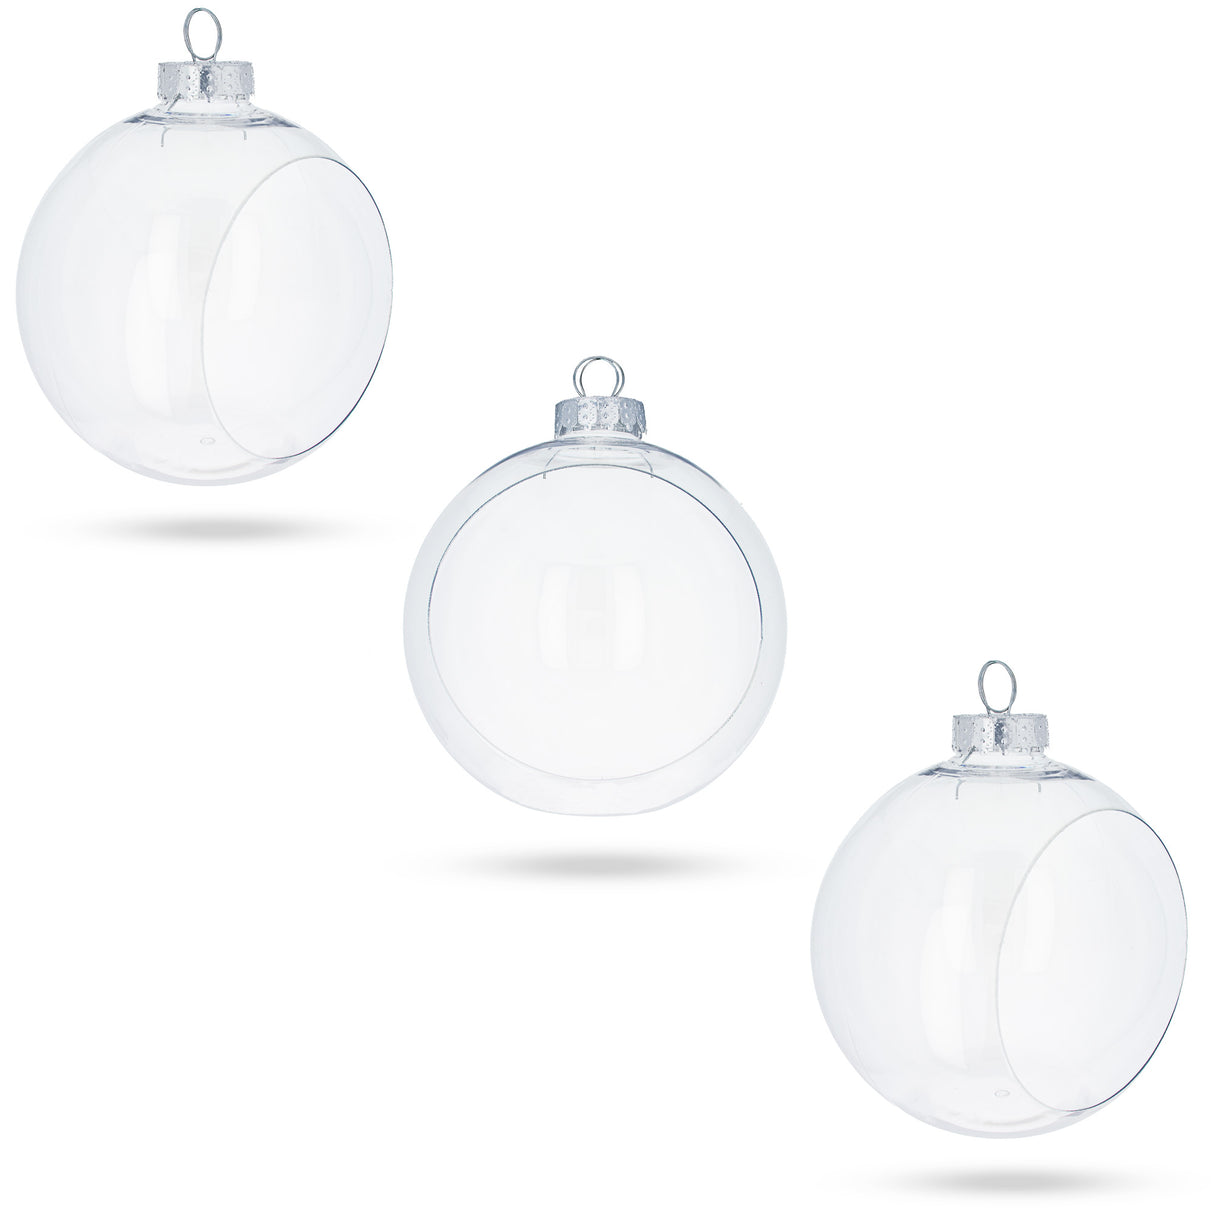 Set of 3 Clear Plastic Christmas Ball Ornaments with Cutout Openings DIY Craft 3.6 Inches in Clear color, Round shape